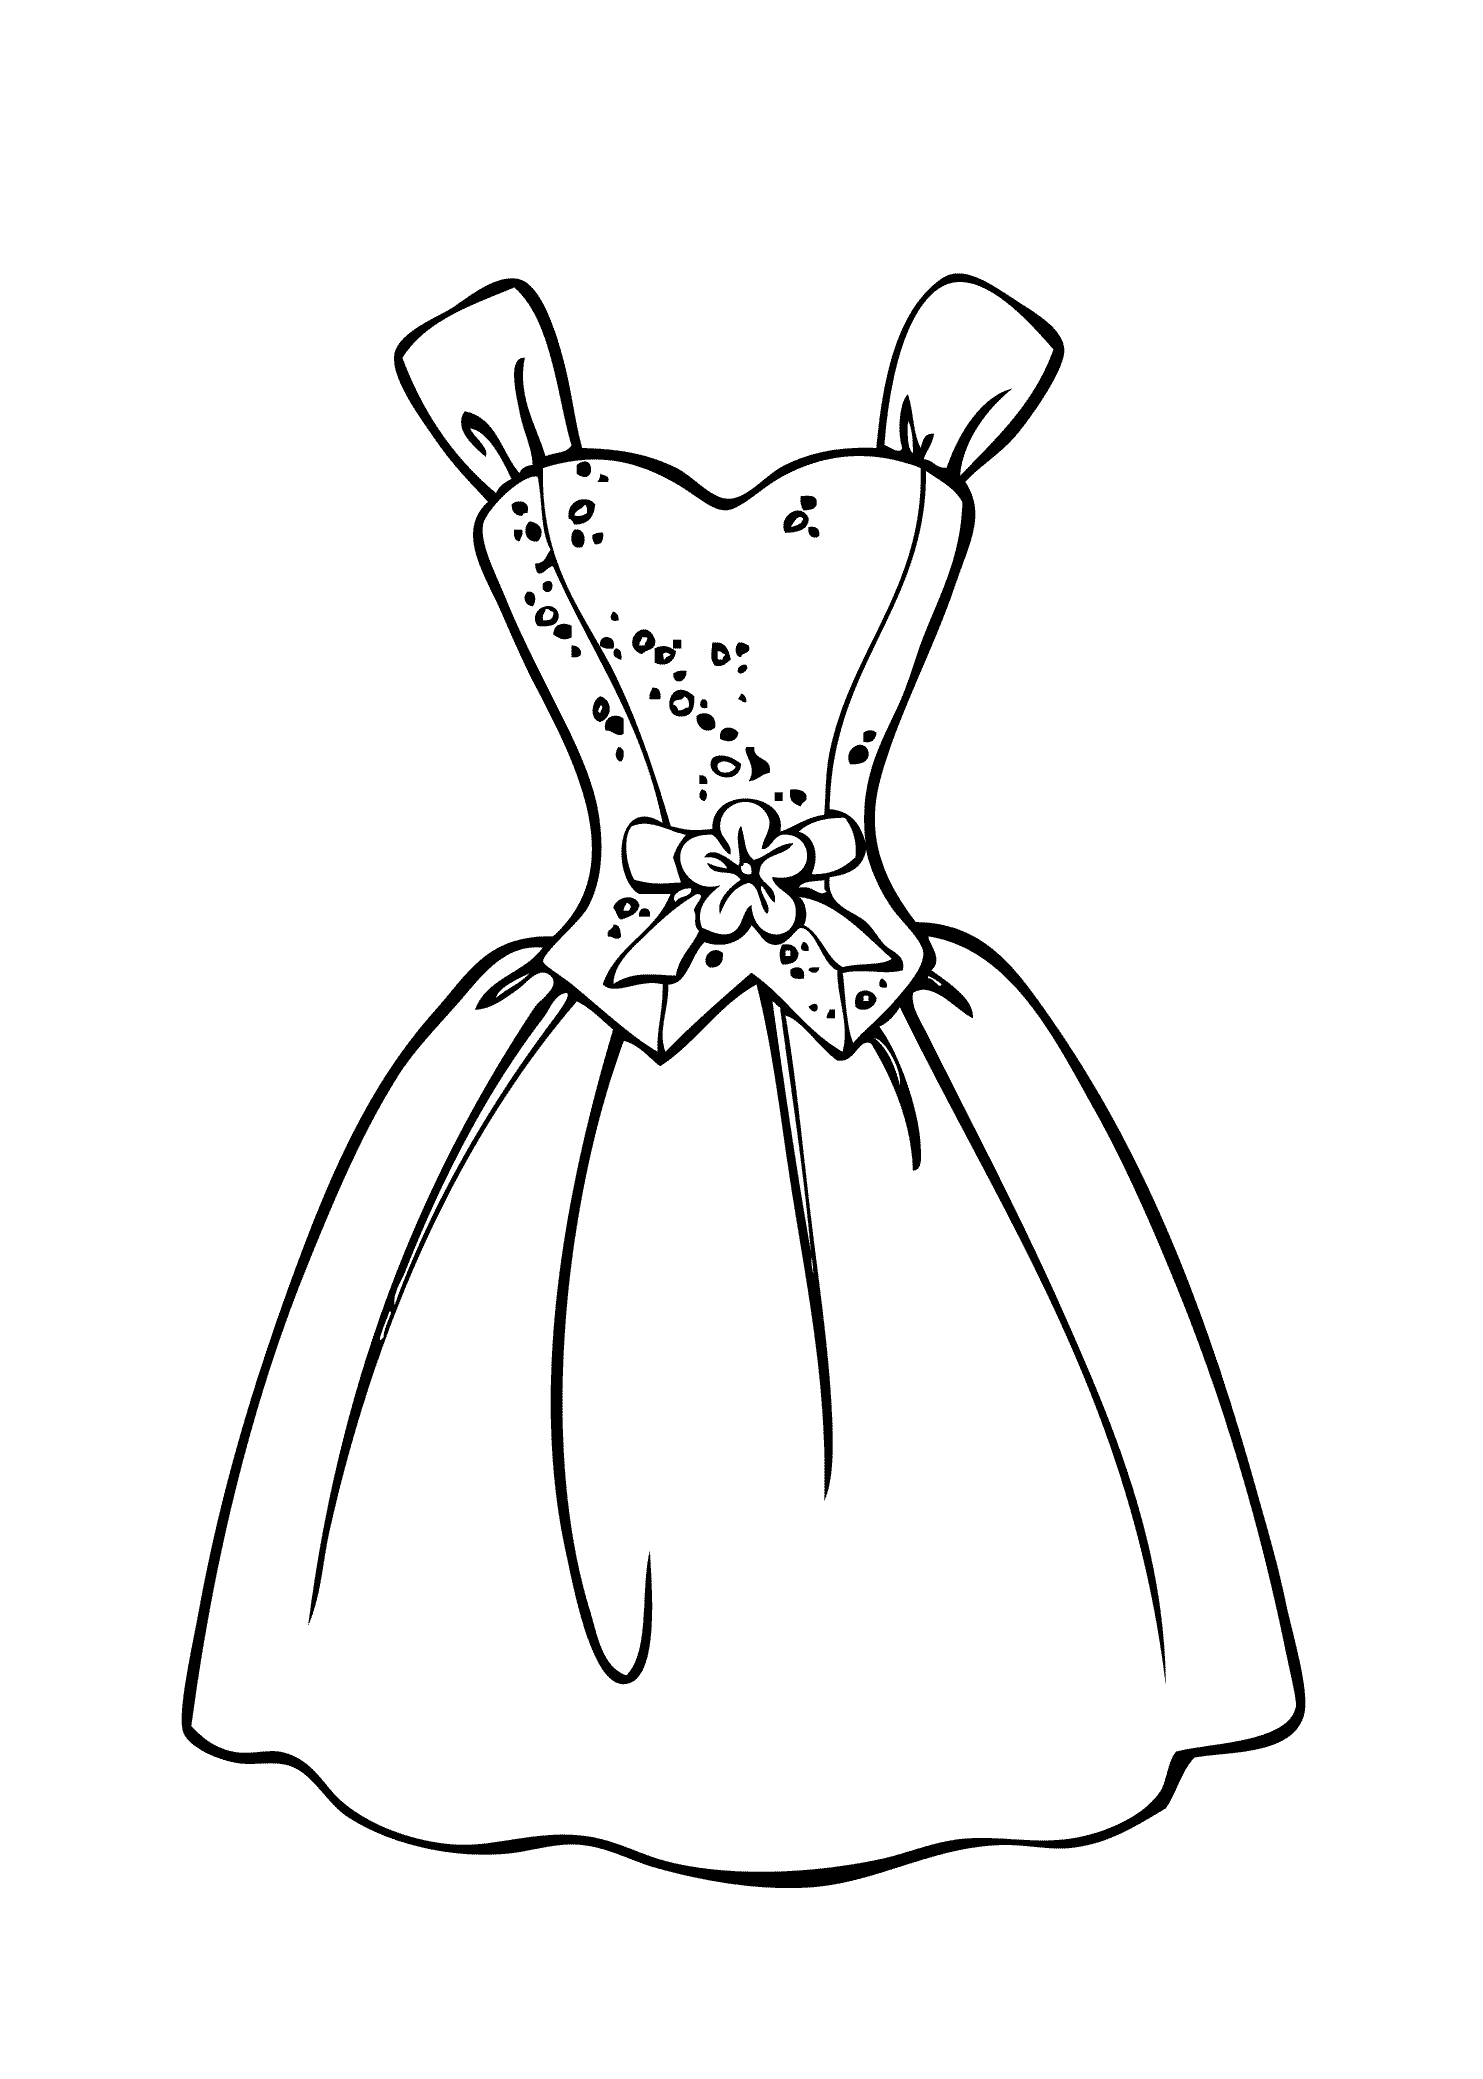 coloring pages of dresses dress coloring pages free download best dress coloring dresses pages coloring of 